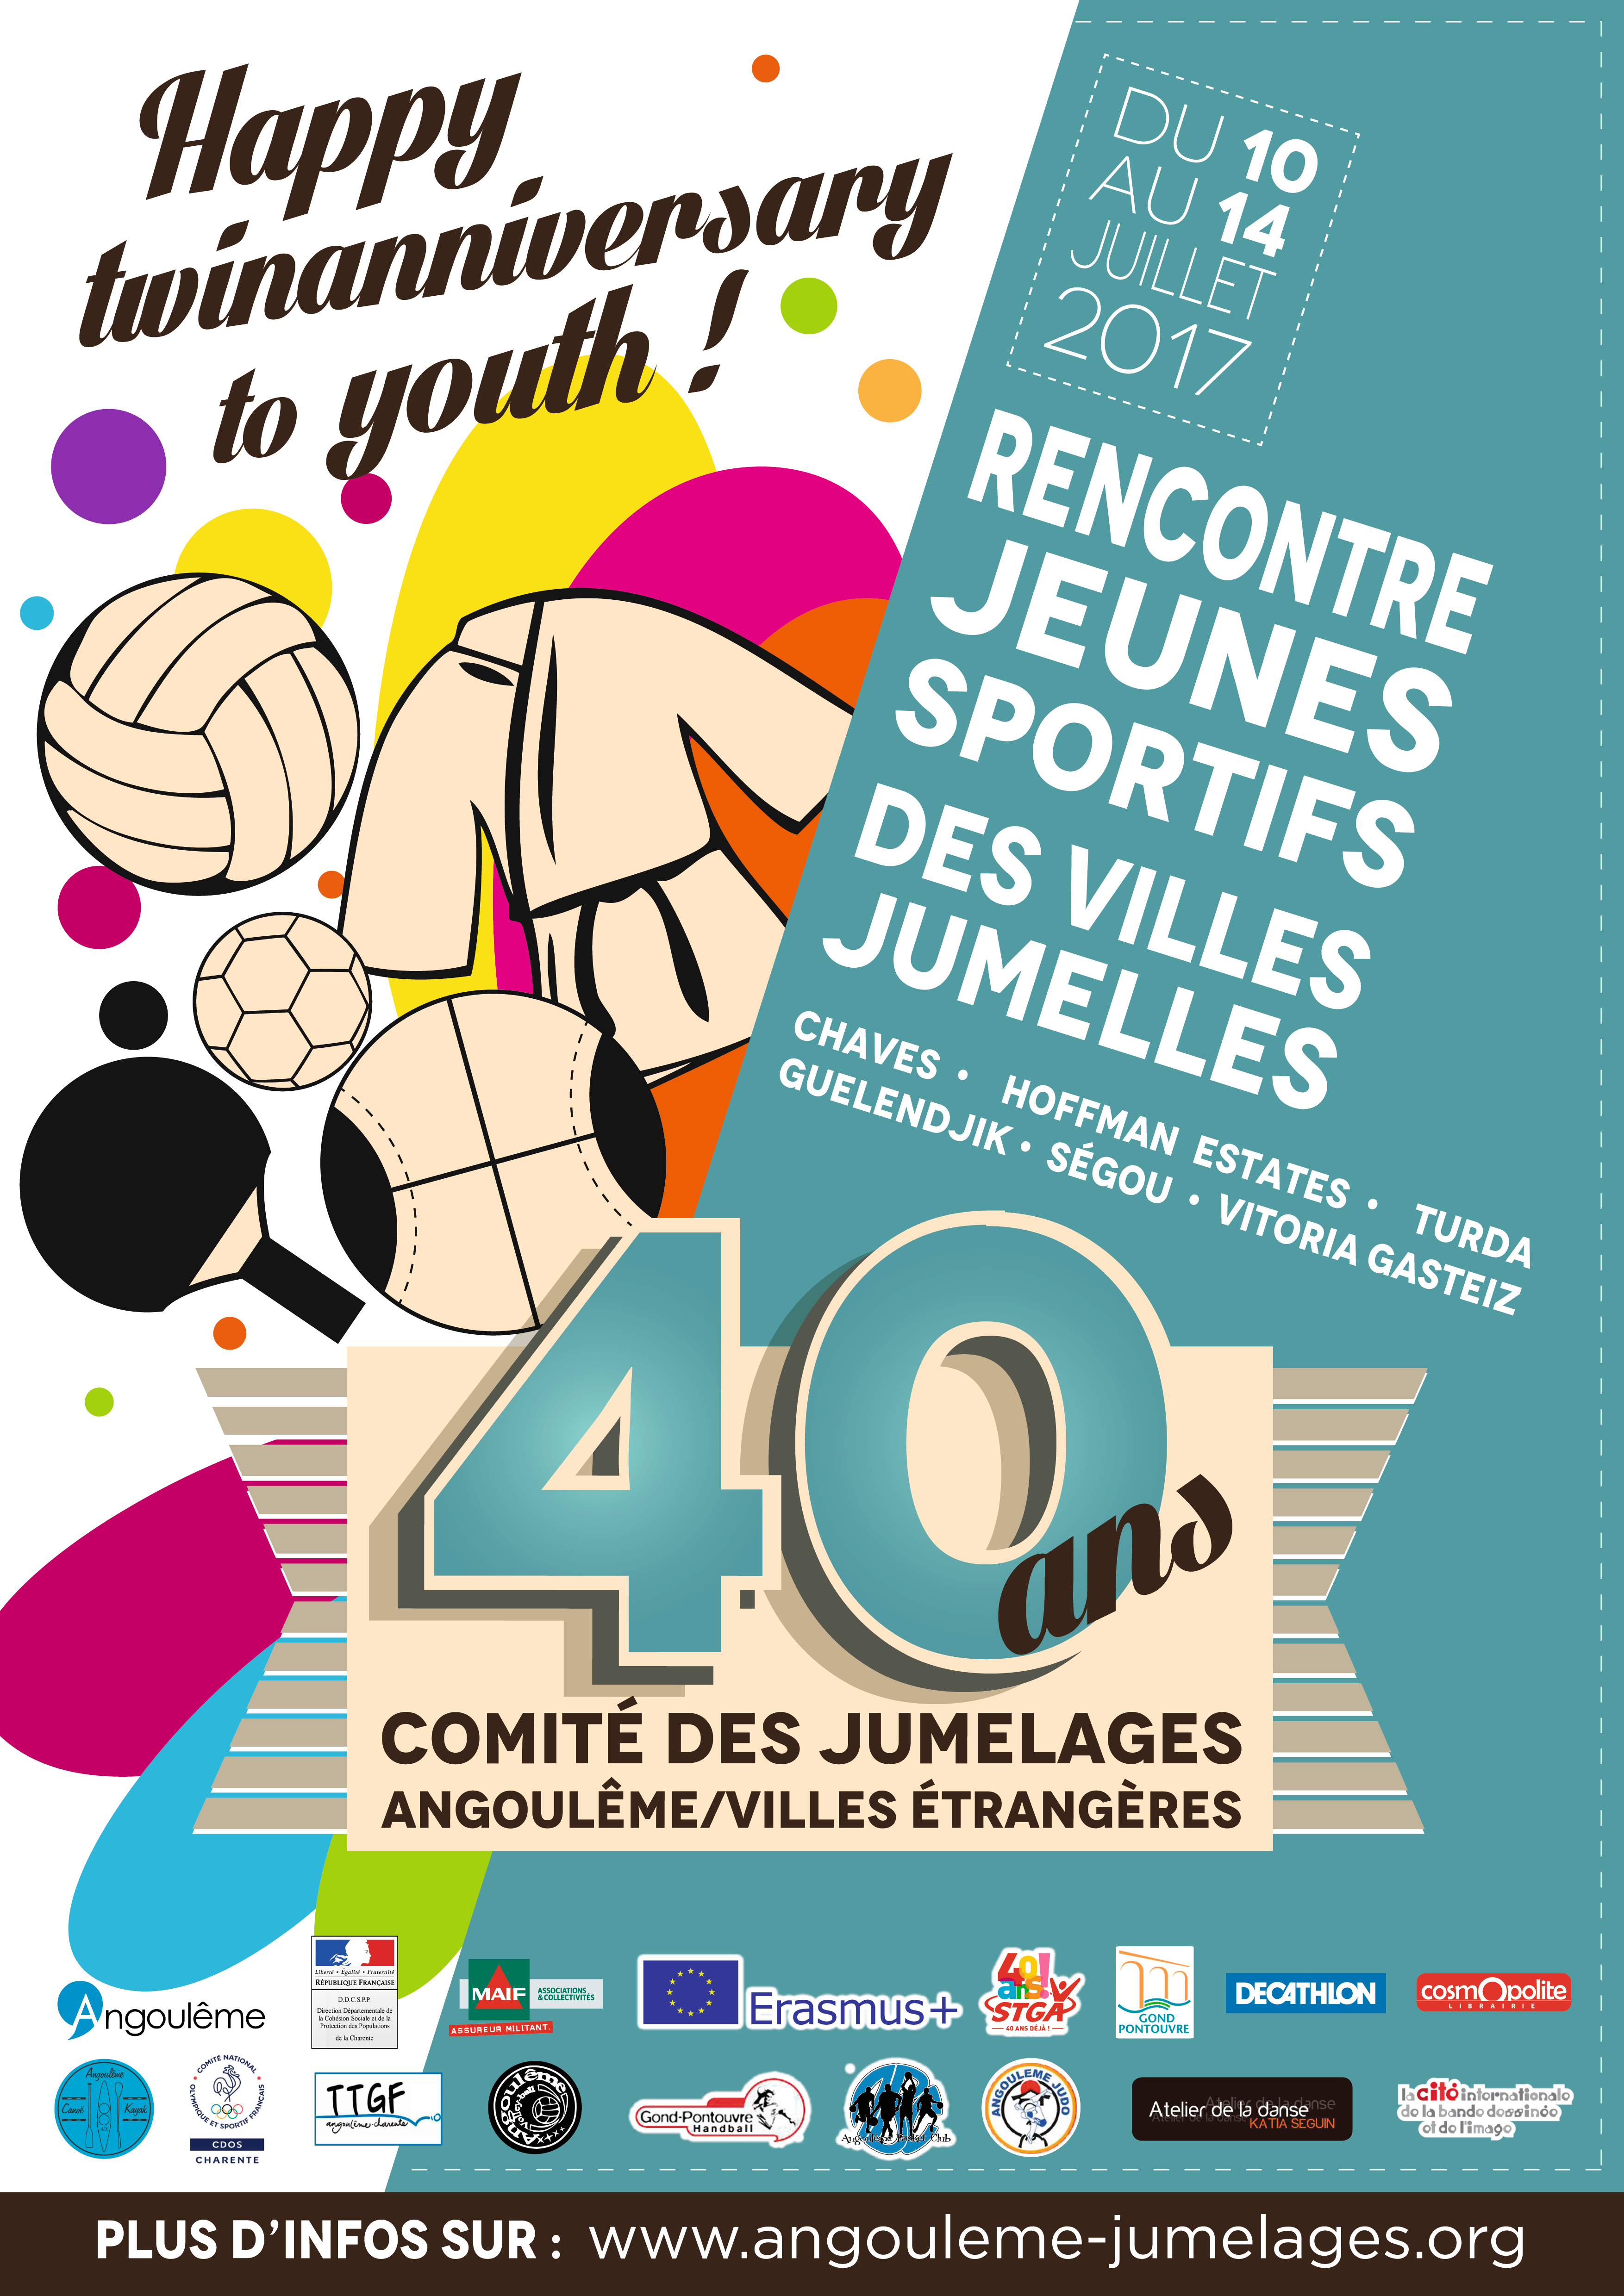 Le jumelage fête ses 40 ans : Happy twinanniversary to youth!